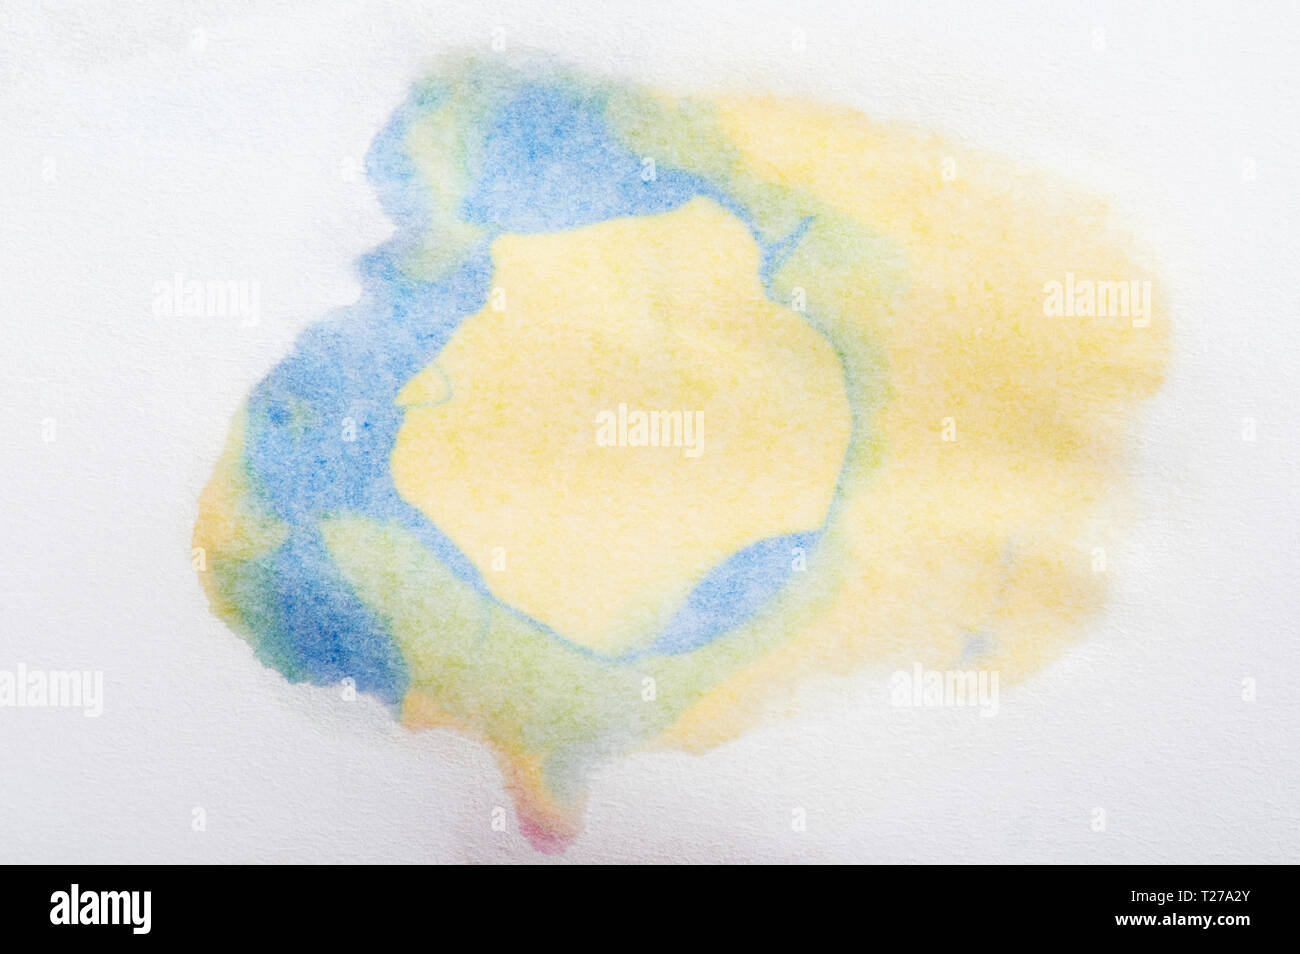 Blue and yellow abstract paint splash on paper close up view Stock Photo